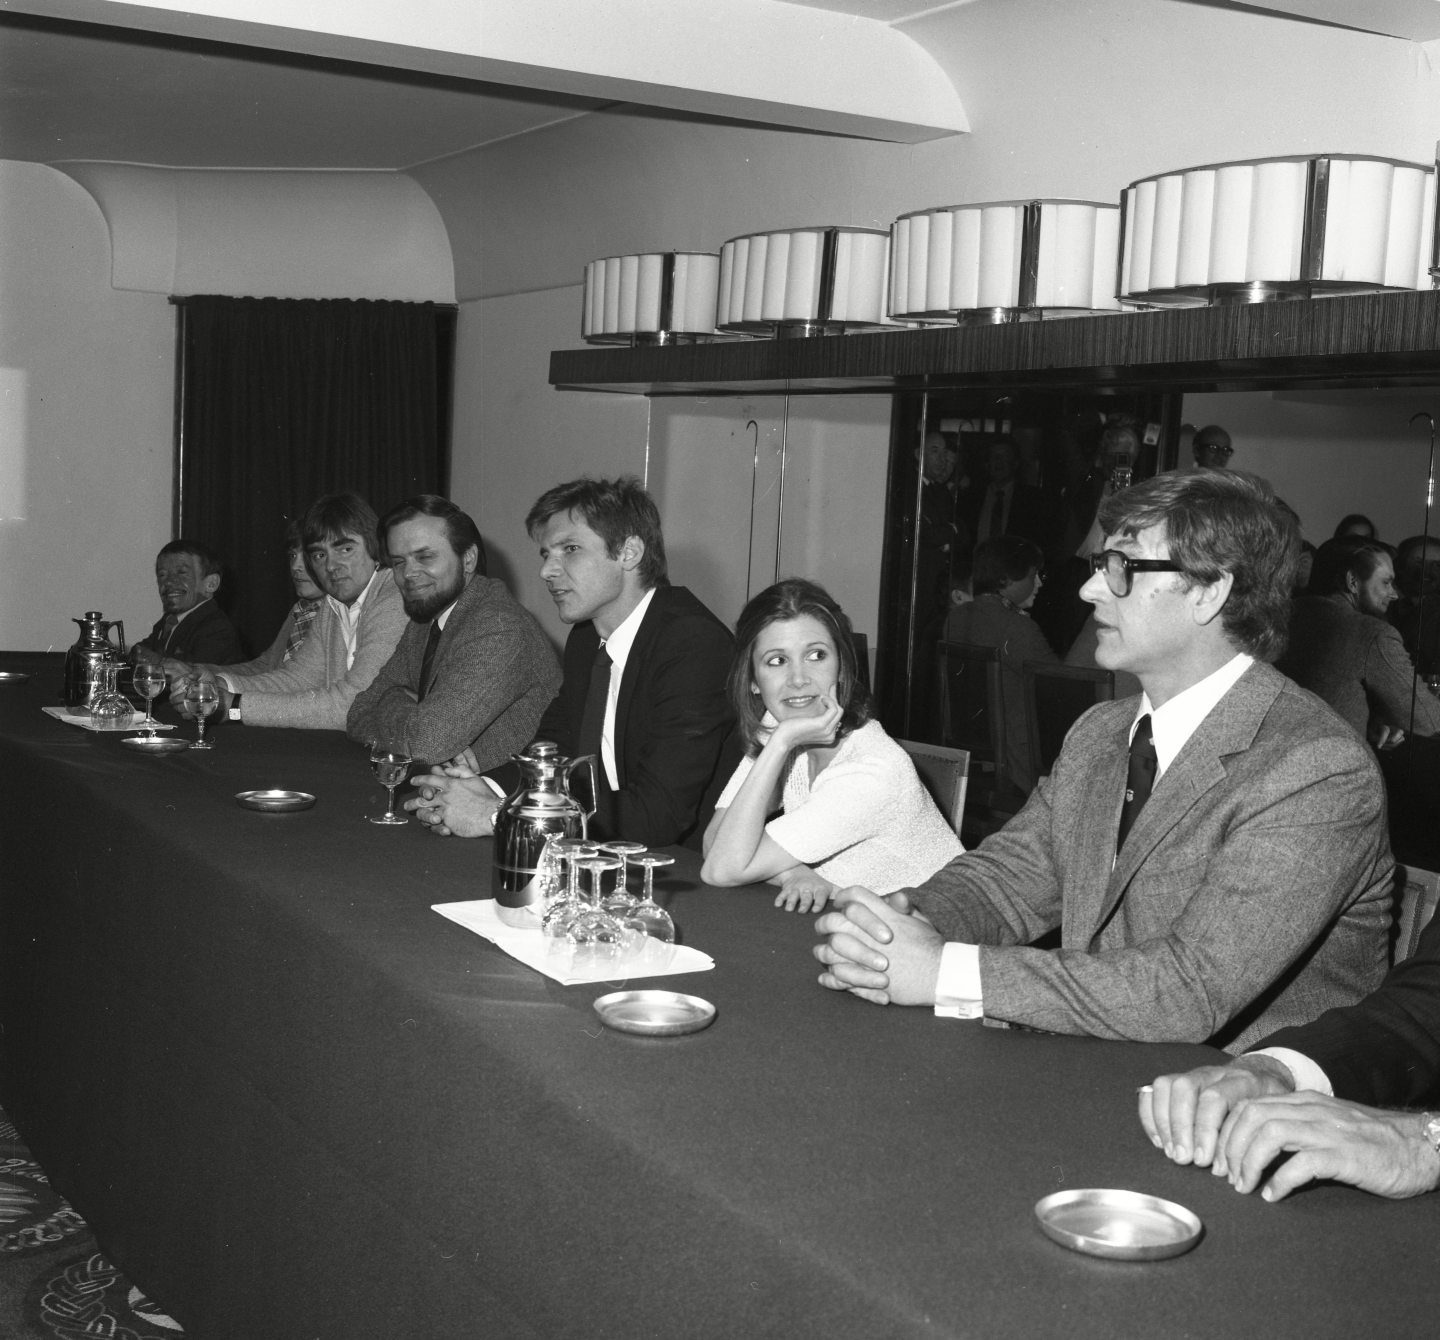 Harrison Ford, Carrie Fisher, David Prowse and Peter Mayhew during a Star Wars press call. Image: Shutterstock.